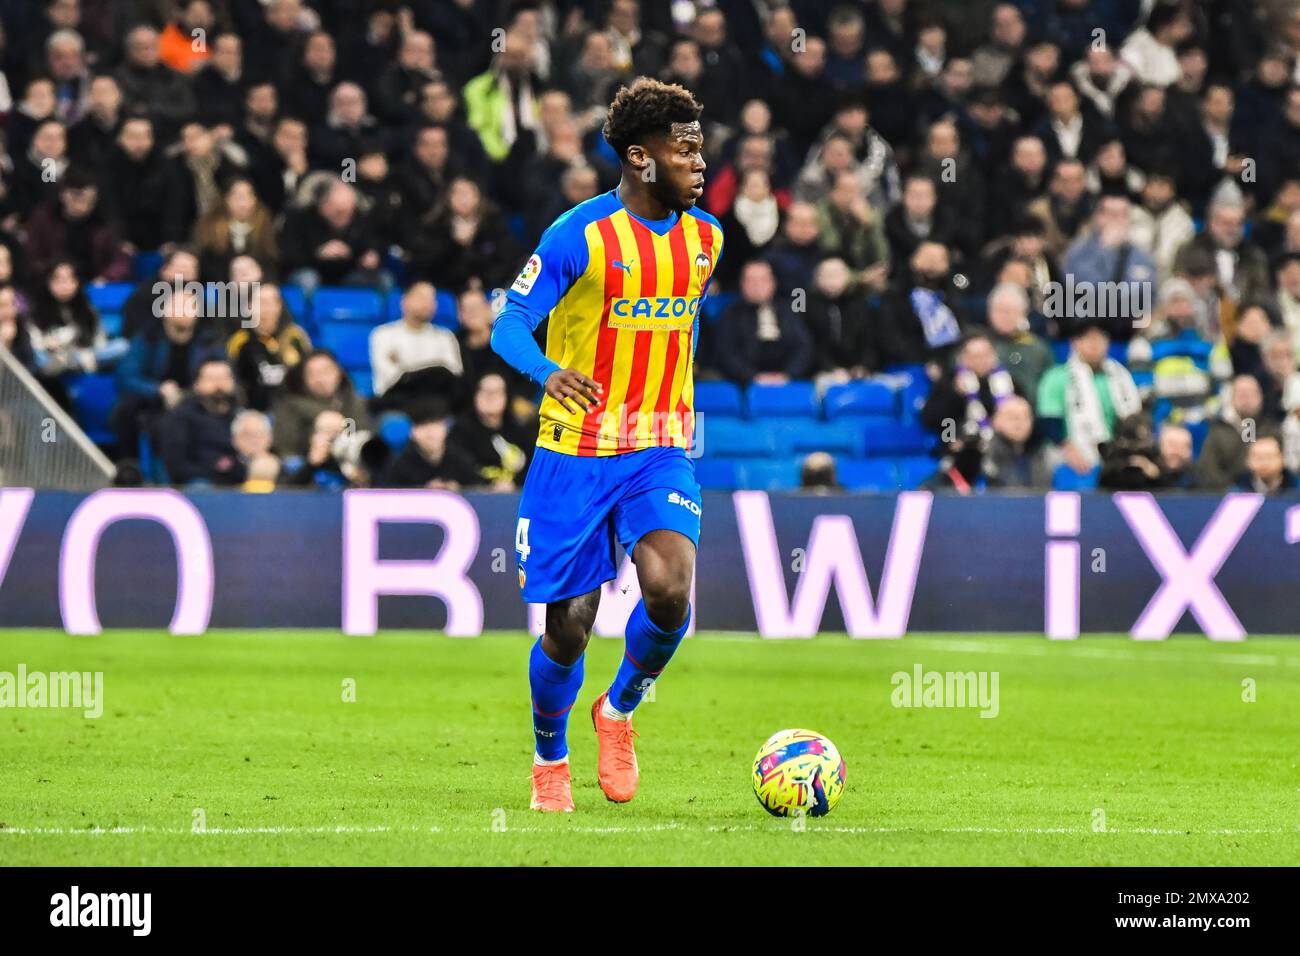 MADRID, SPAIN - FEBRUARY 2: Yunus Musah of Valencia CF drive the ball during the match between Real Madrid CF and Valencia CF of La Liga Santander on February 2, 2022 at Santiago Bernabeu of Madrid, Spain. (Photo by Samuel Carreño/ PX Images) Stock Photo